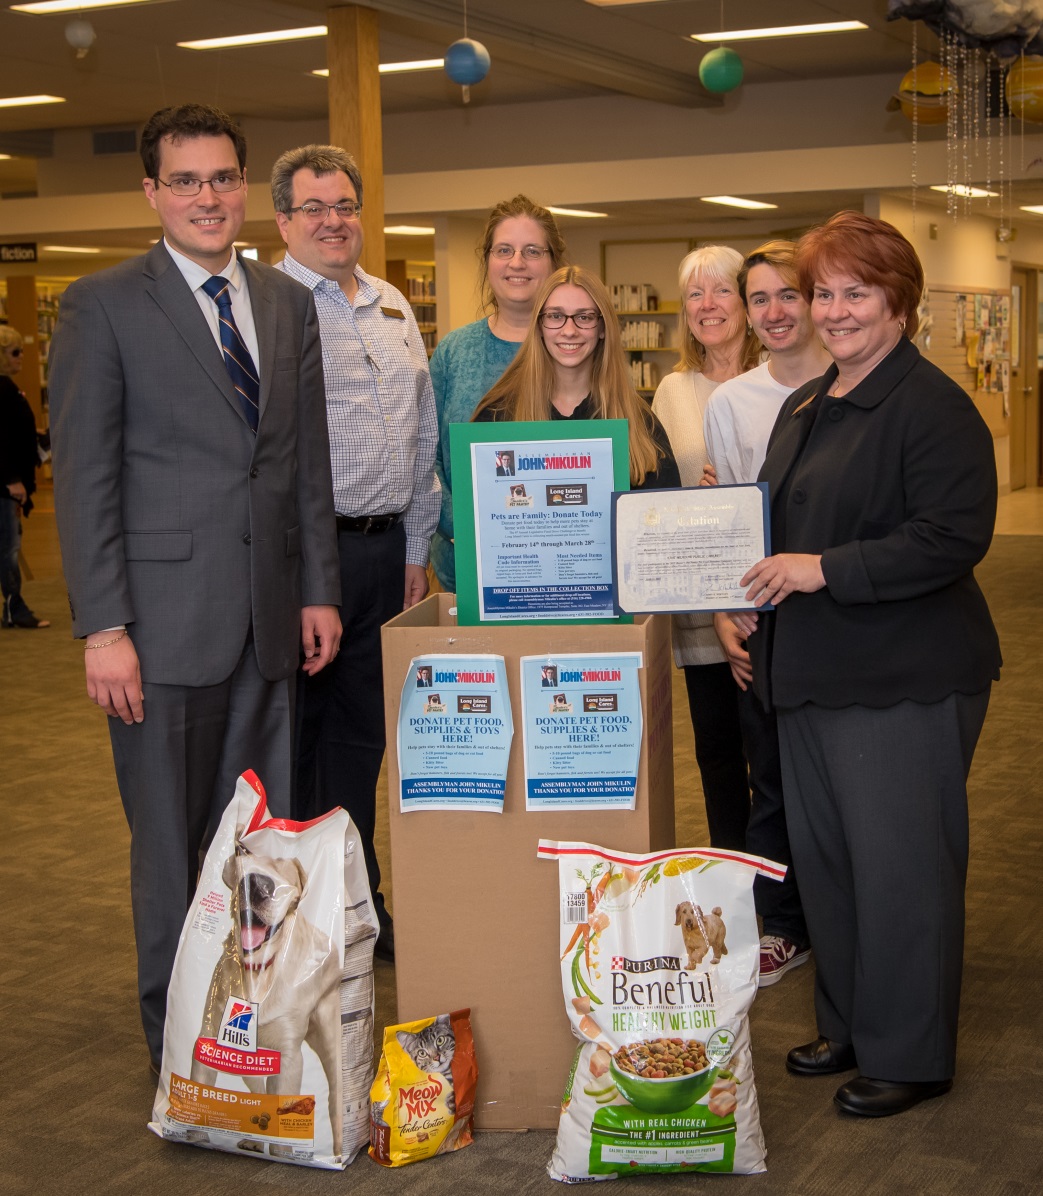 Assemblyman John Mikulin (R,C,Ref-Bethpage), library employees (from left to right) Rocco Cassano, Mary Loiacono, Julia Incammicia, Karen Brown, Rhyan Mogilski and Carol Probeyahn, the library directo